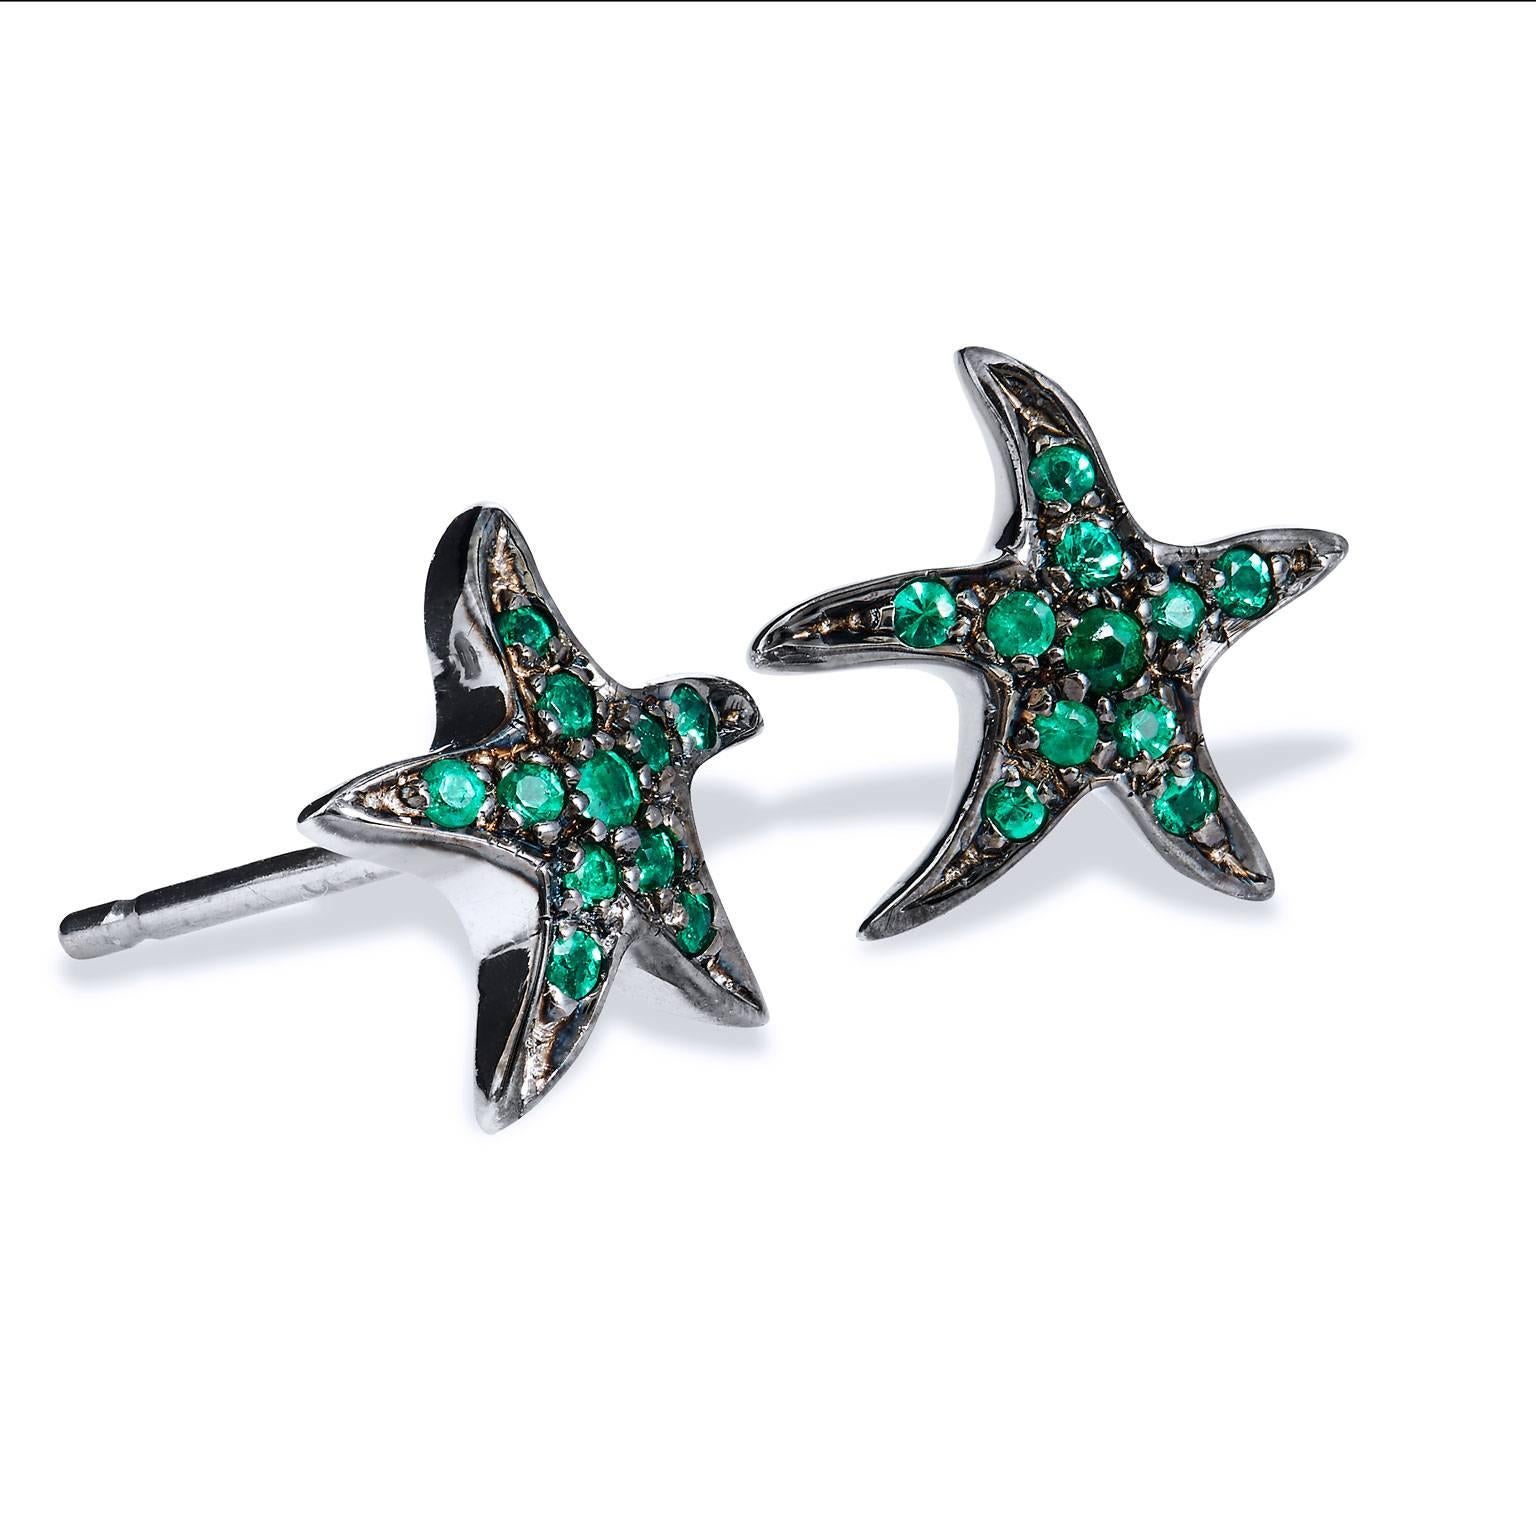 A gift from the sea, this pair of 18 KT white palladium starfish earrings features 22 pieces of fine emeralds pave set with a black rhodium finish.
Hand-made. One of a kind. Available now, and only at H&H Jewels
